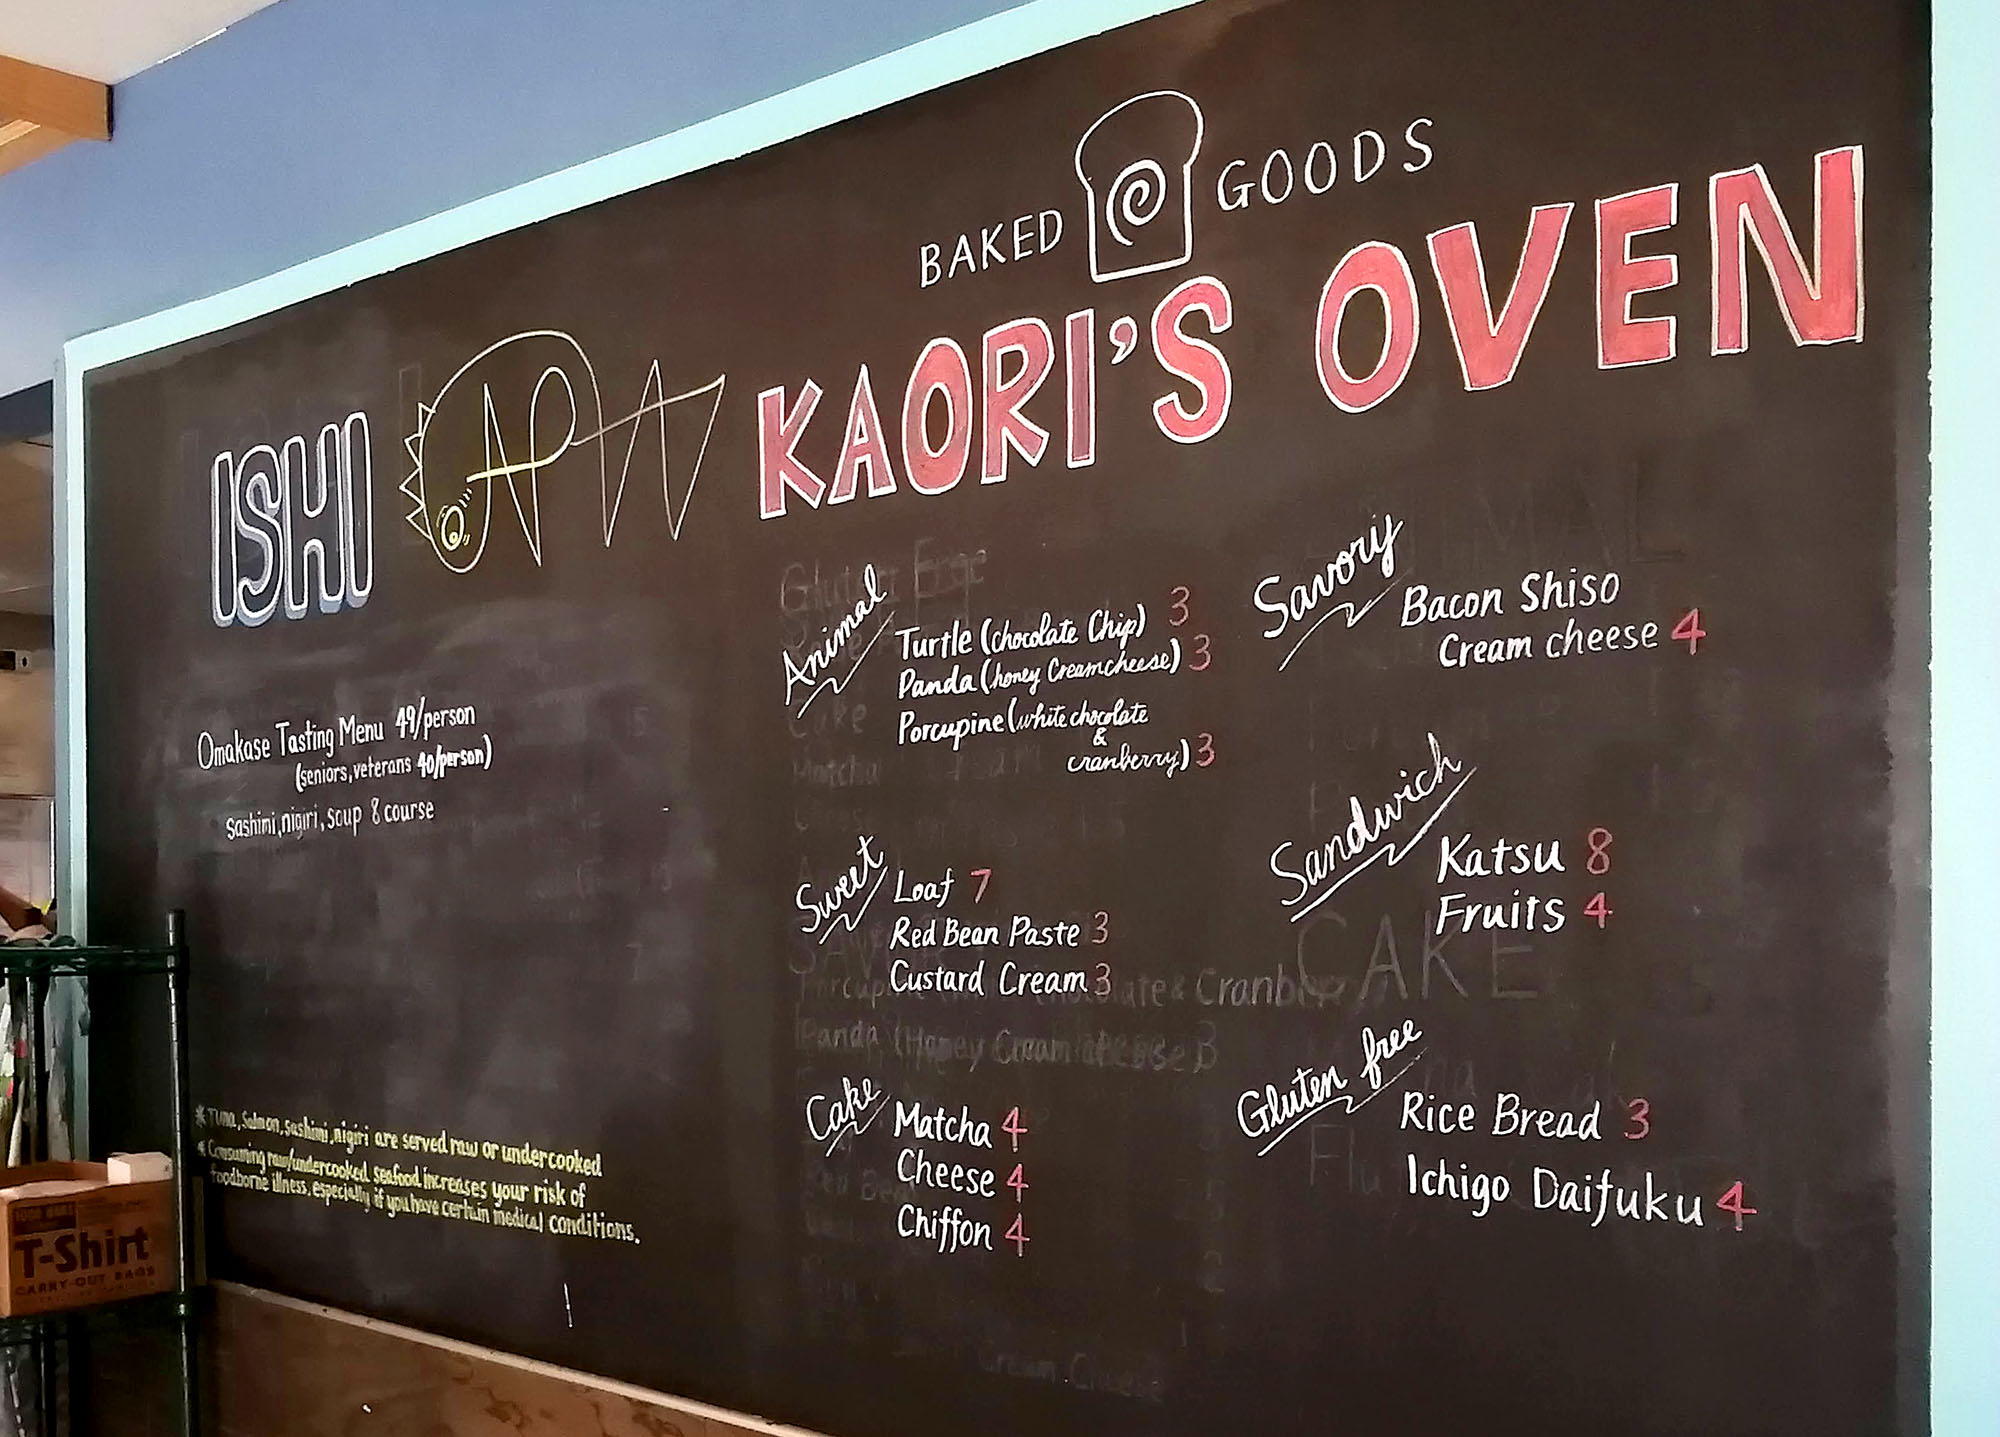 A handwritten blackboard with â€œISHIâ€ and â€œKaoriâ€™s Ovenâ€ clearly drawn at the top; the small type describes the omakase tasting menu and several bakery items for sale. Photo by Paul Young.